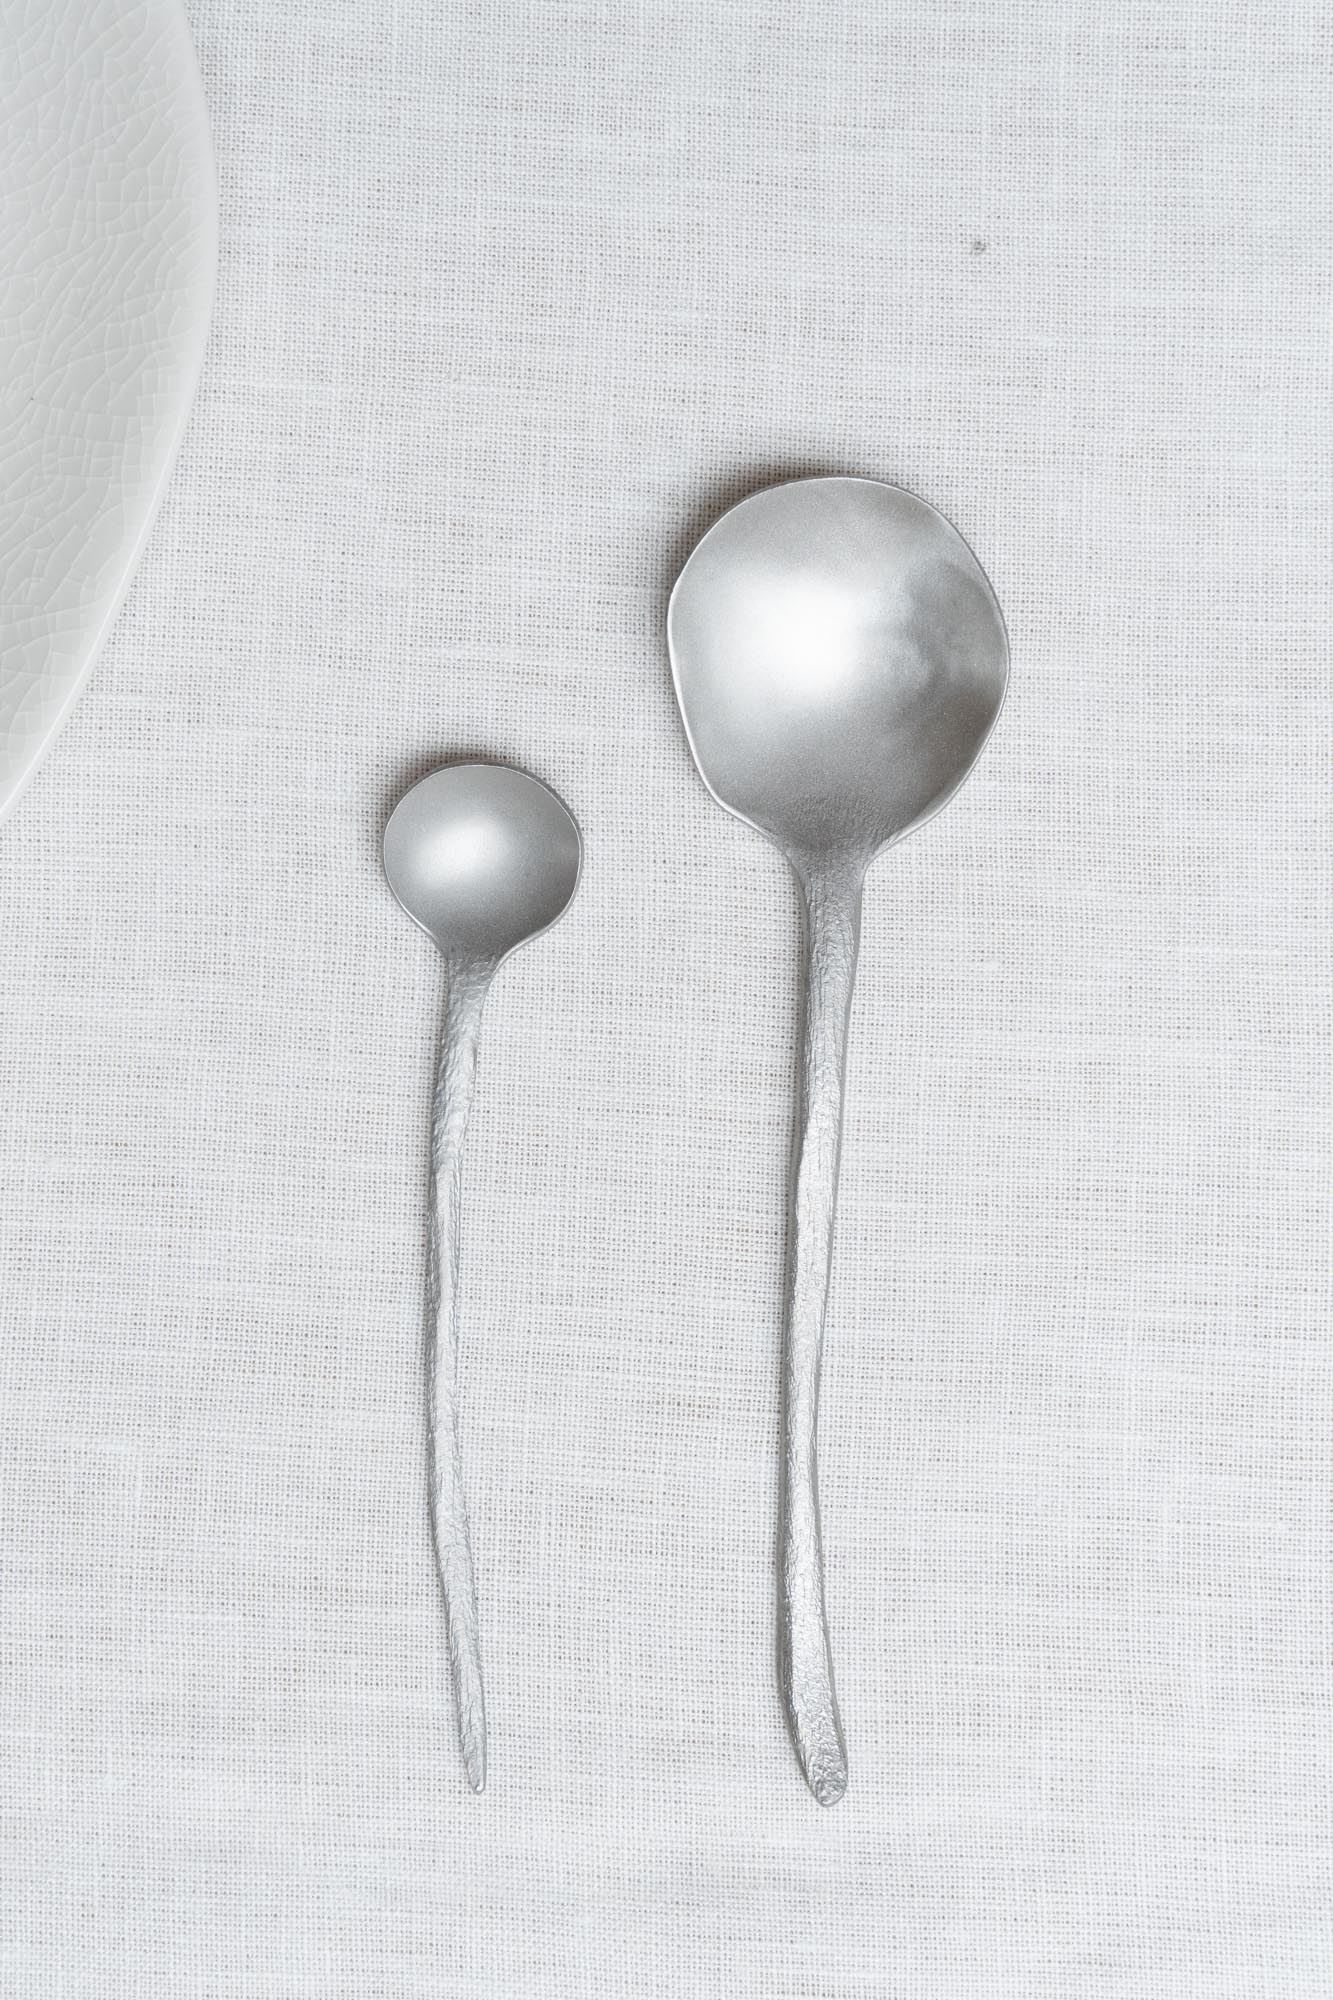 Dessert Spoon from the Flora Vulgaris Cutlery Collection by Serax.